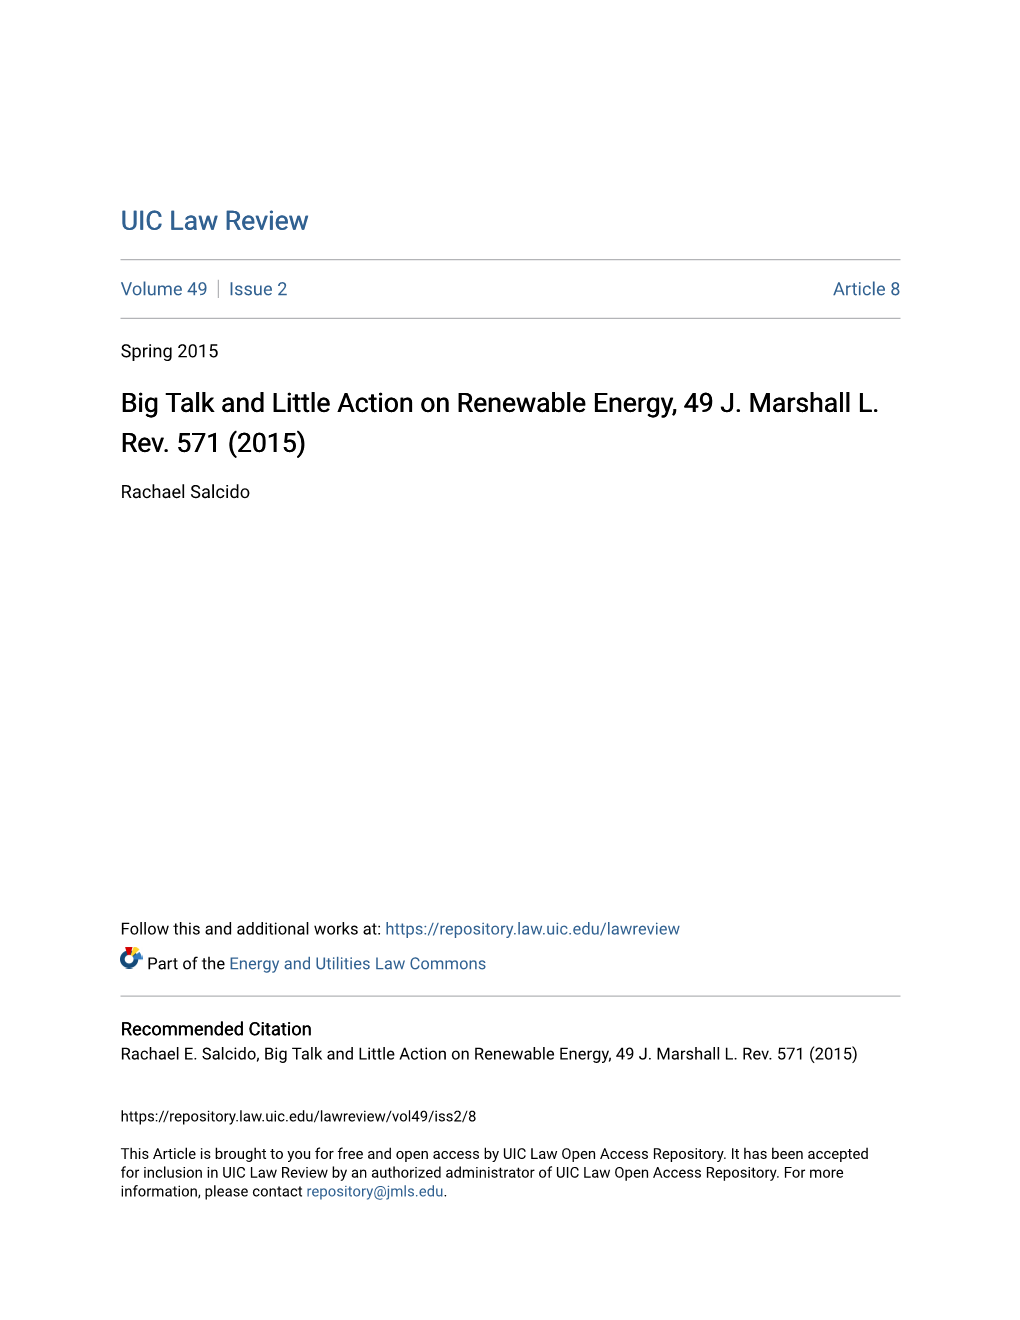 Big Talk and Little Action on Renewable Energy, 49 J. Marshall L